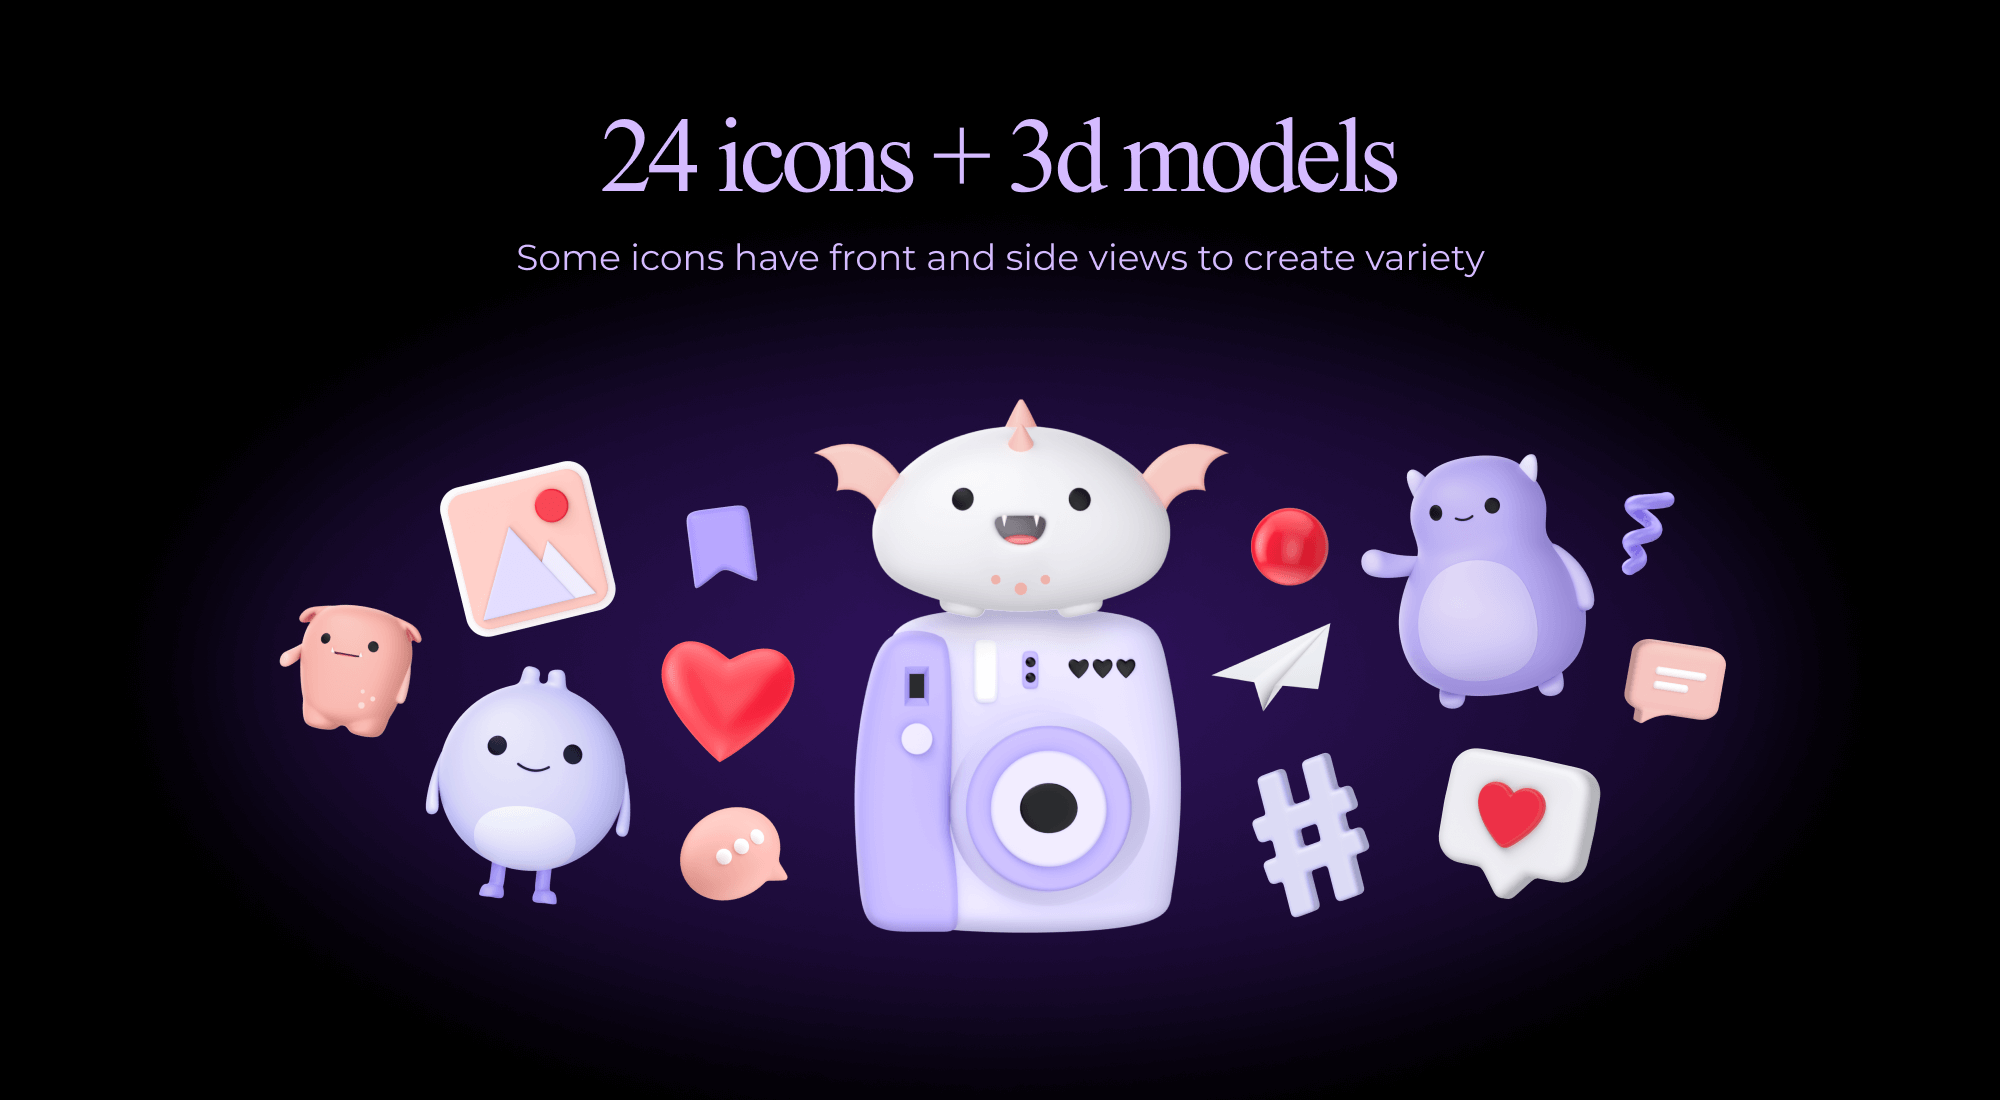 3d Cute Monsters Icons Insta Pack Facebook Image.